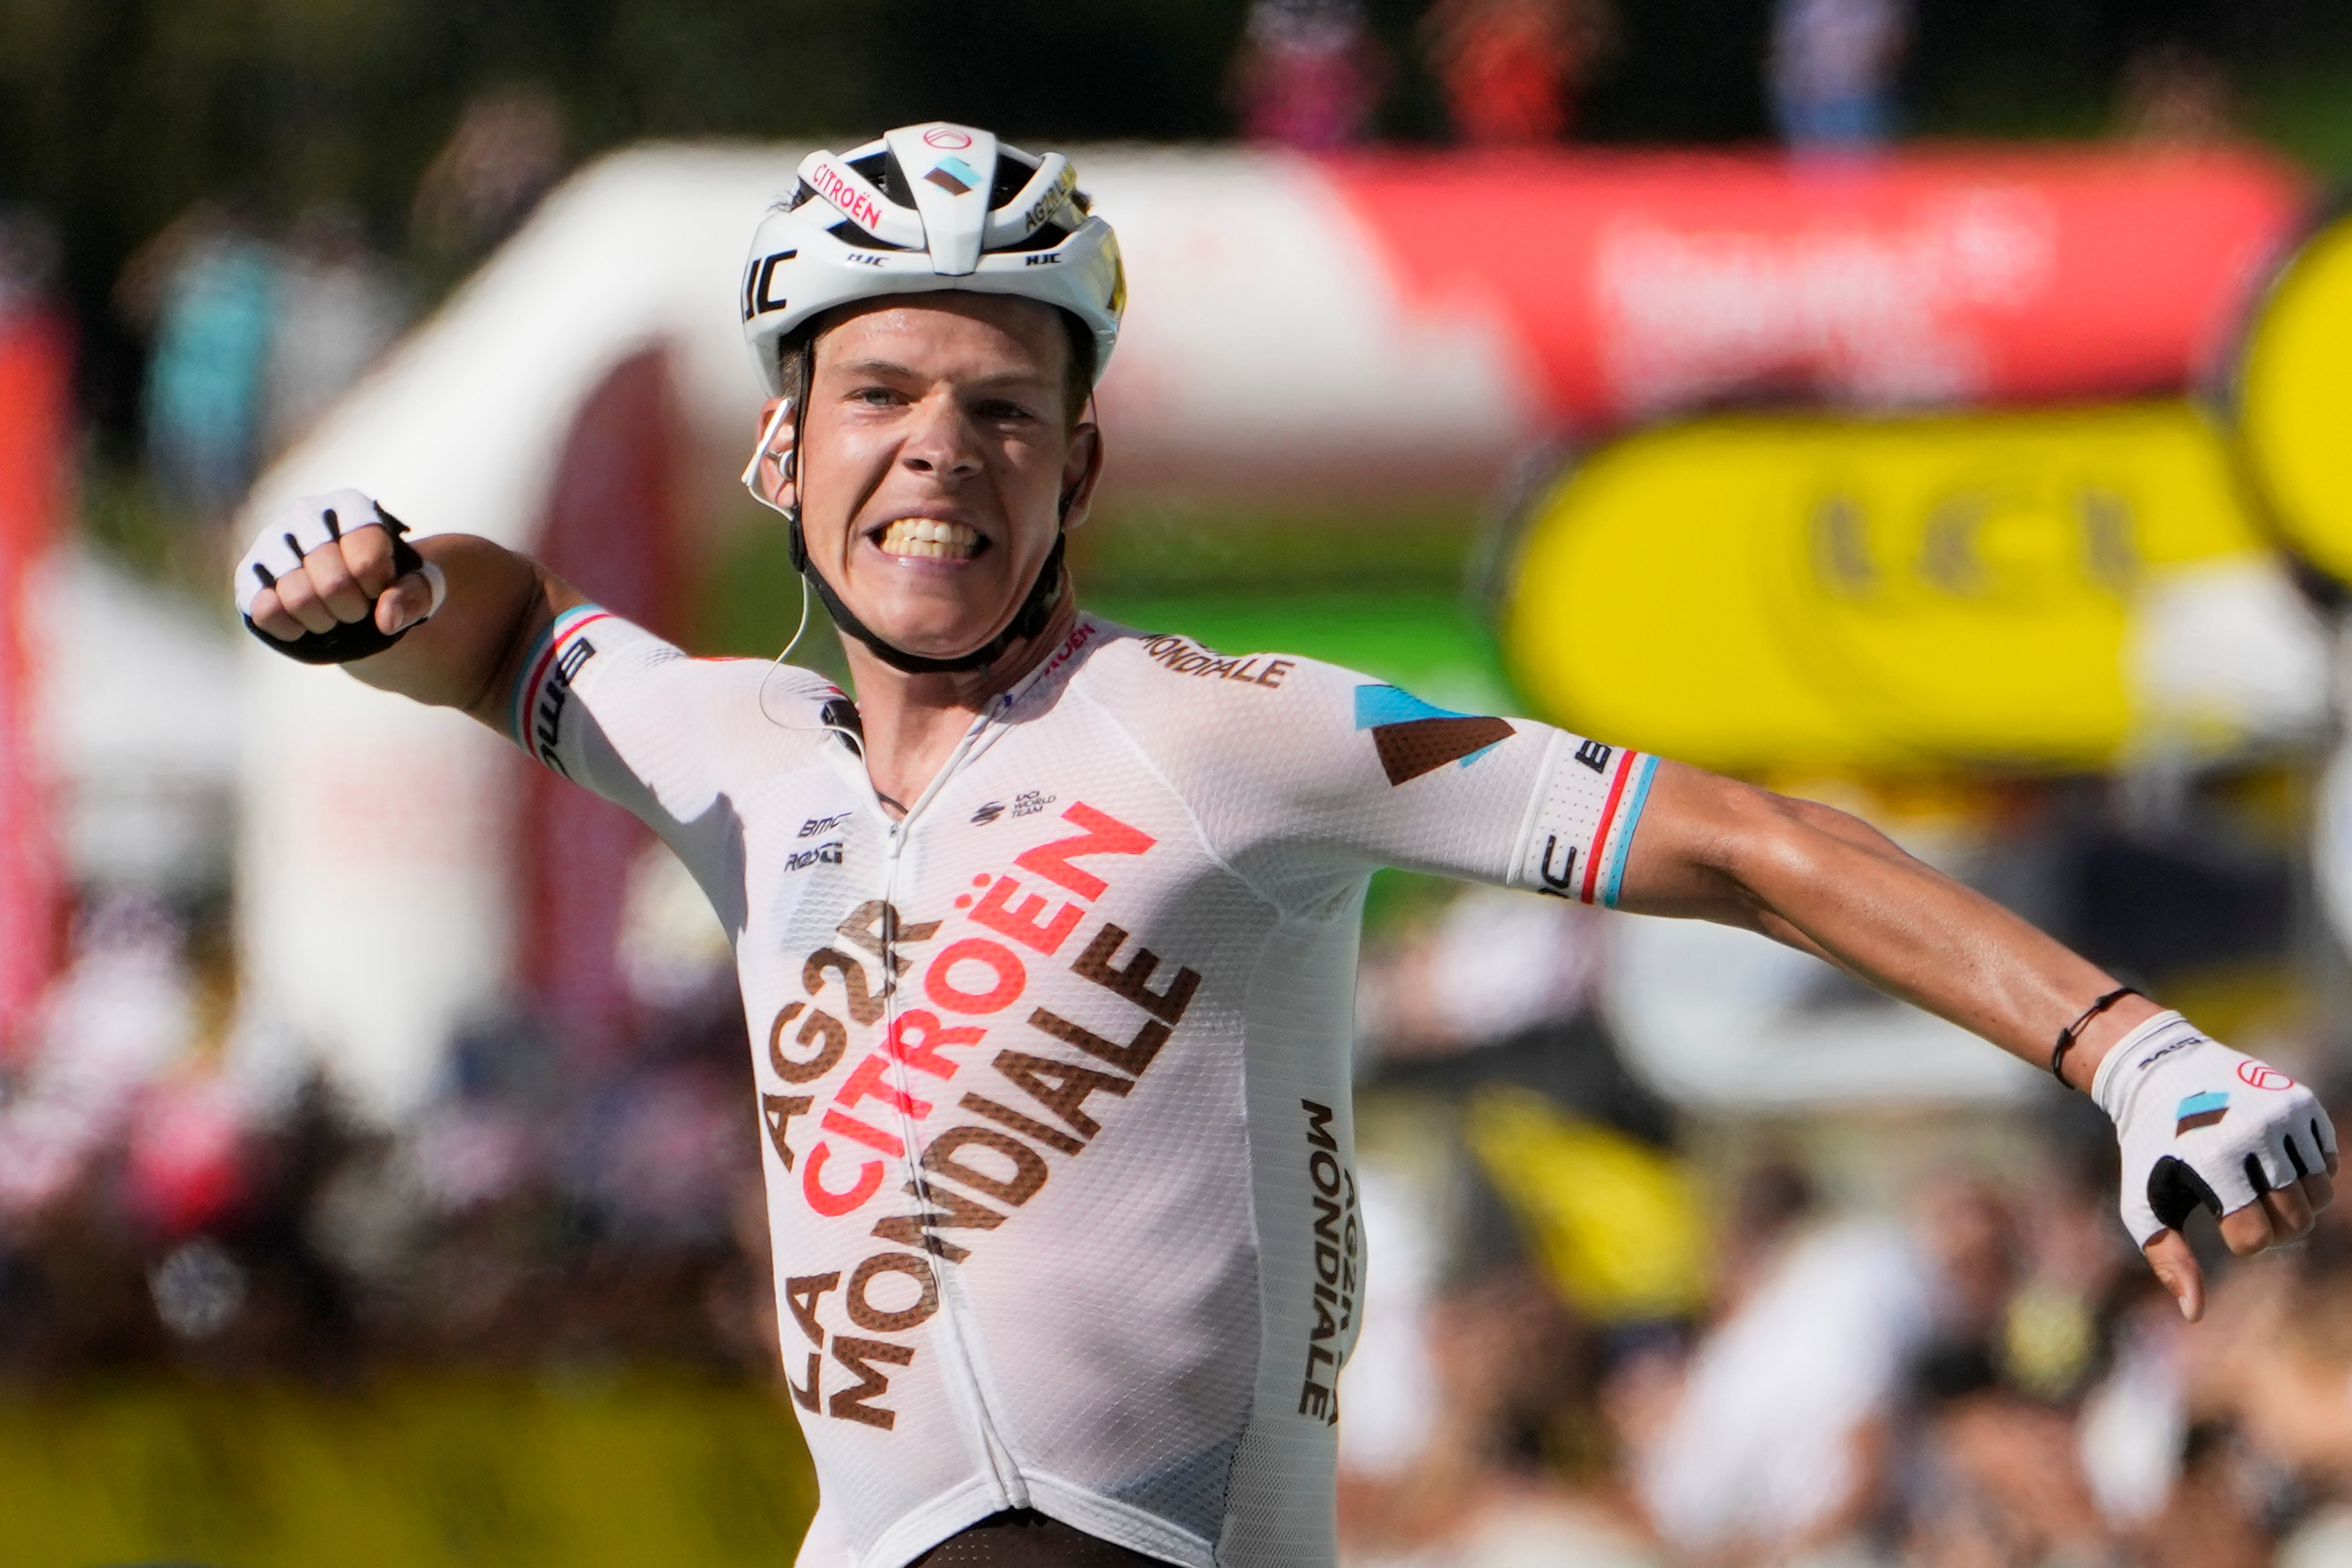 Bob Jungels celebrates his Tour de France stage victory in Chalet on Sunday